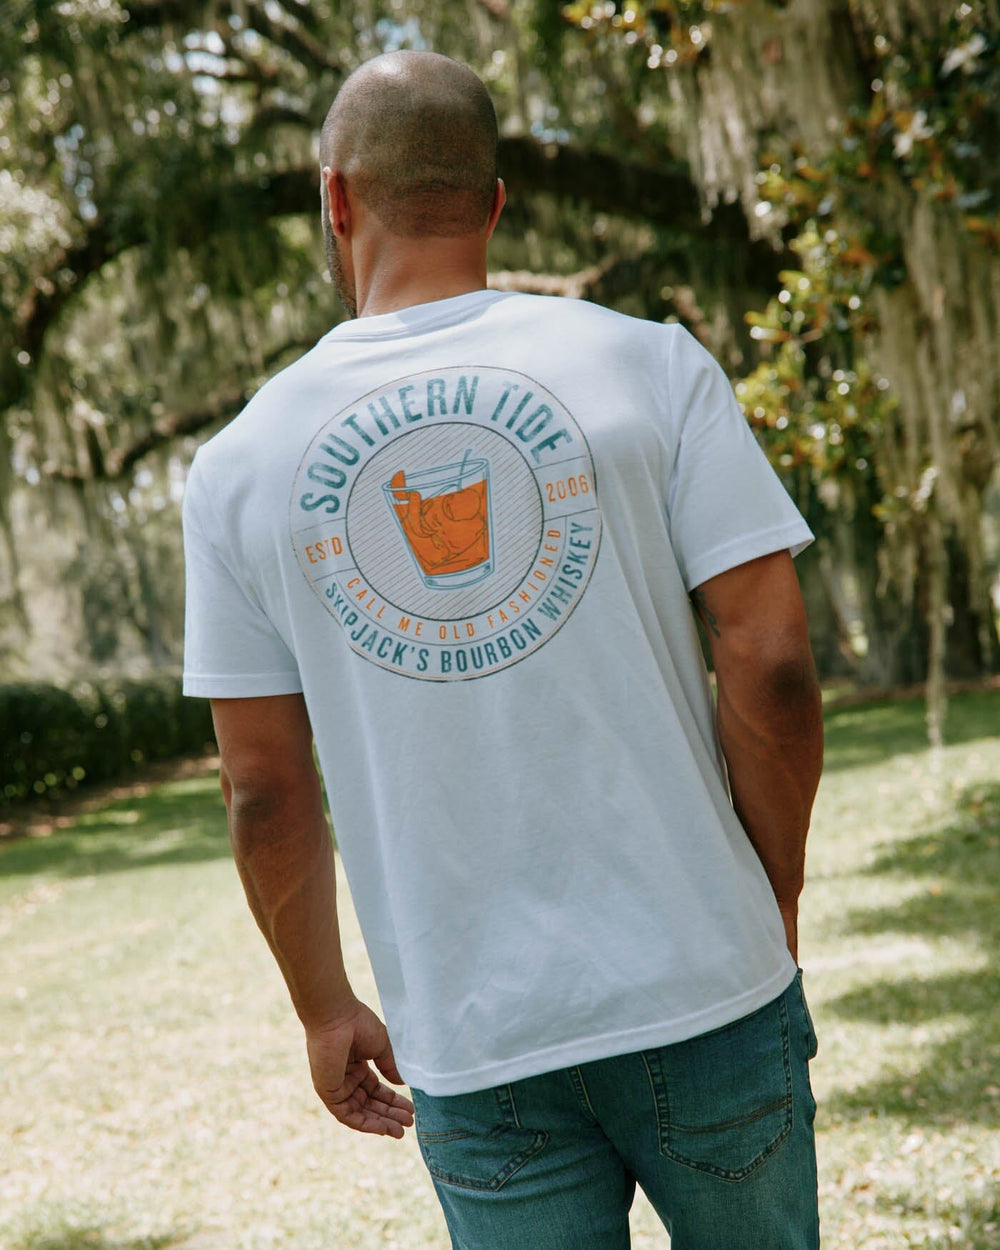 The back view of the Southern Tide Call Me Old Fashioned T-Shirt by Southern Tide - Classic White